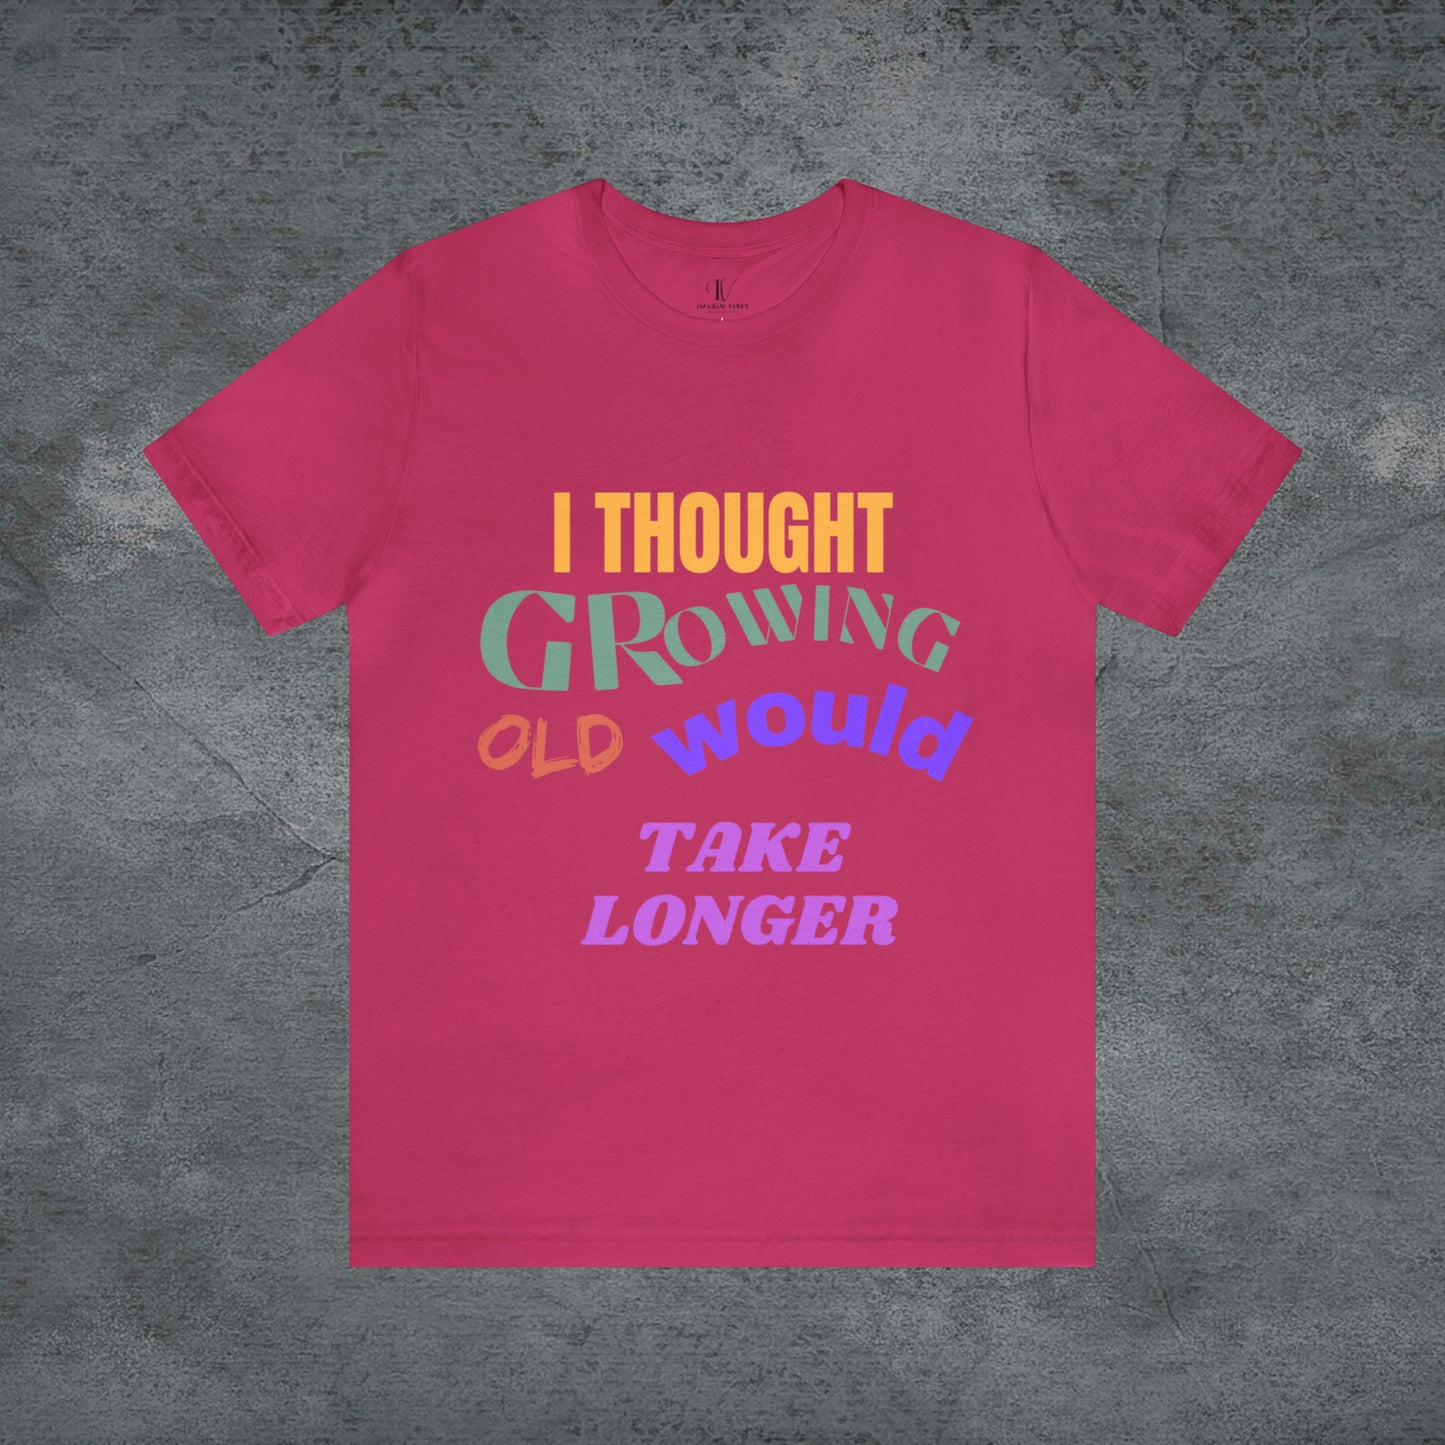 I Thought Growing Old Would Take Longer T-Shirt - Getting Older T-Shirt - Funny Adulting Tee - Old Age T-Shirt - Old Person T-Shirt T-Shirt Berry S 